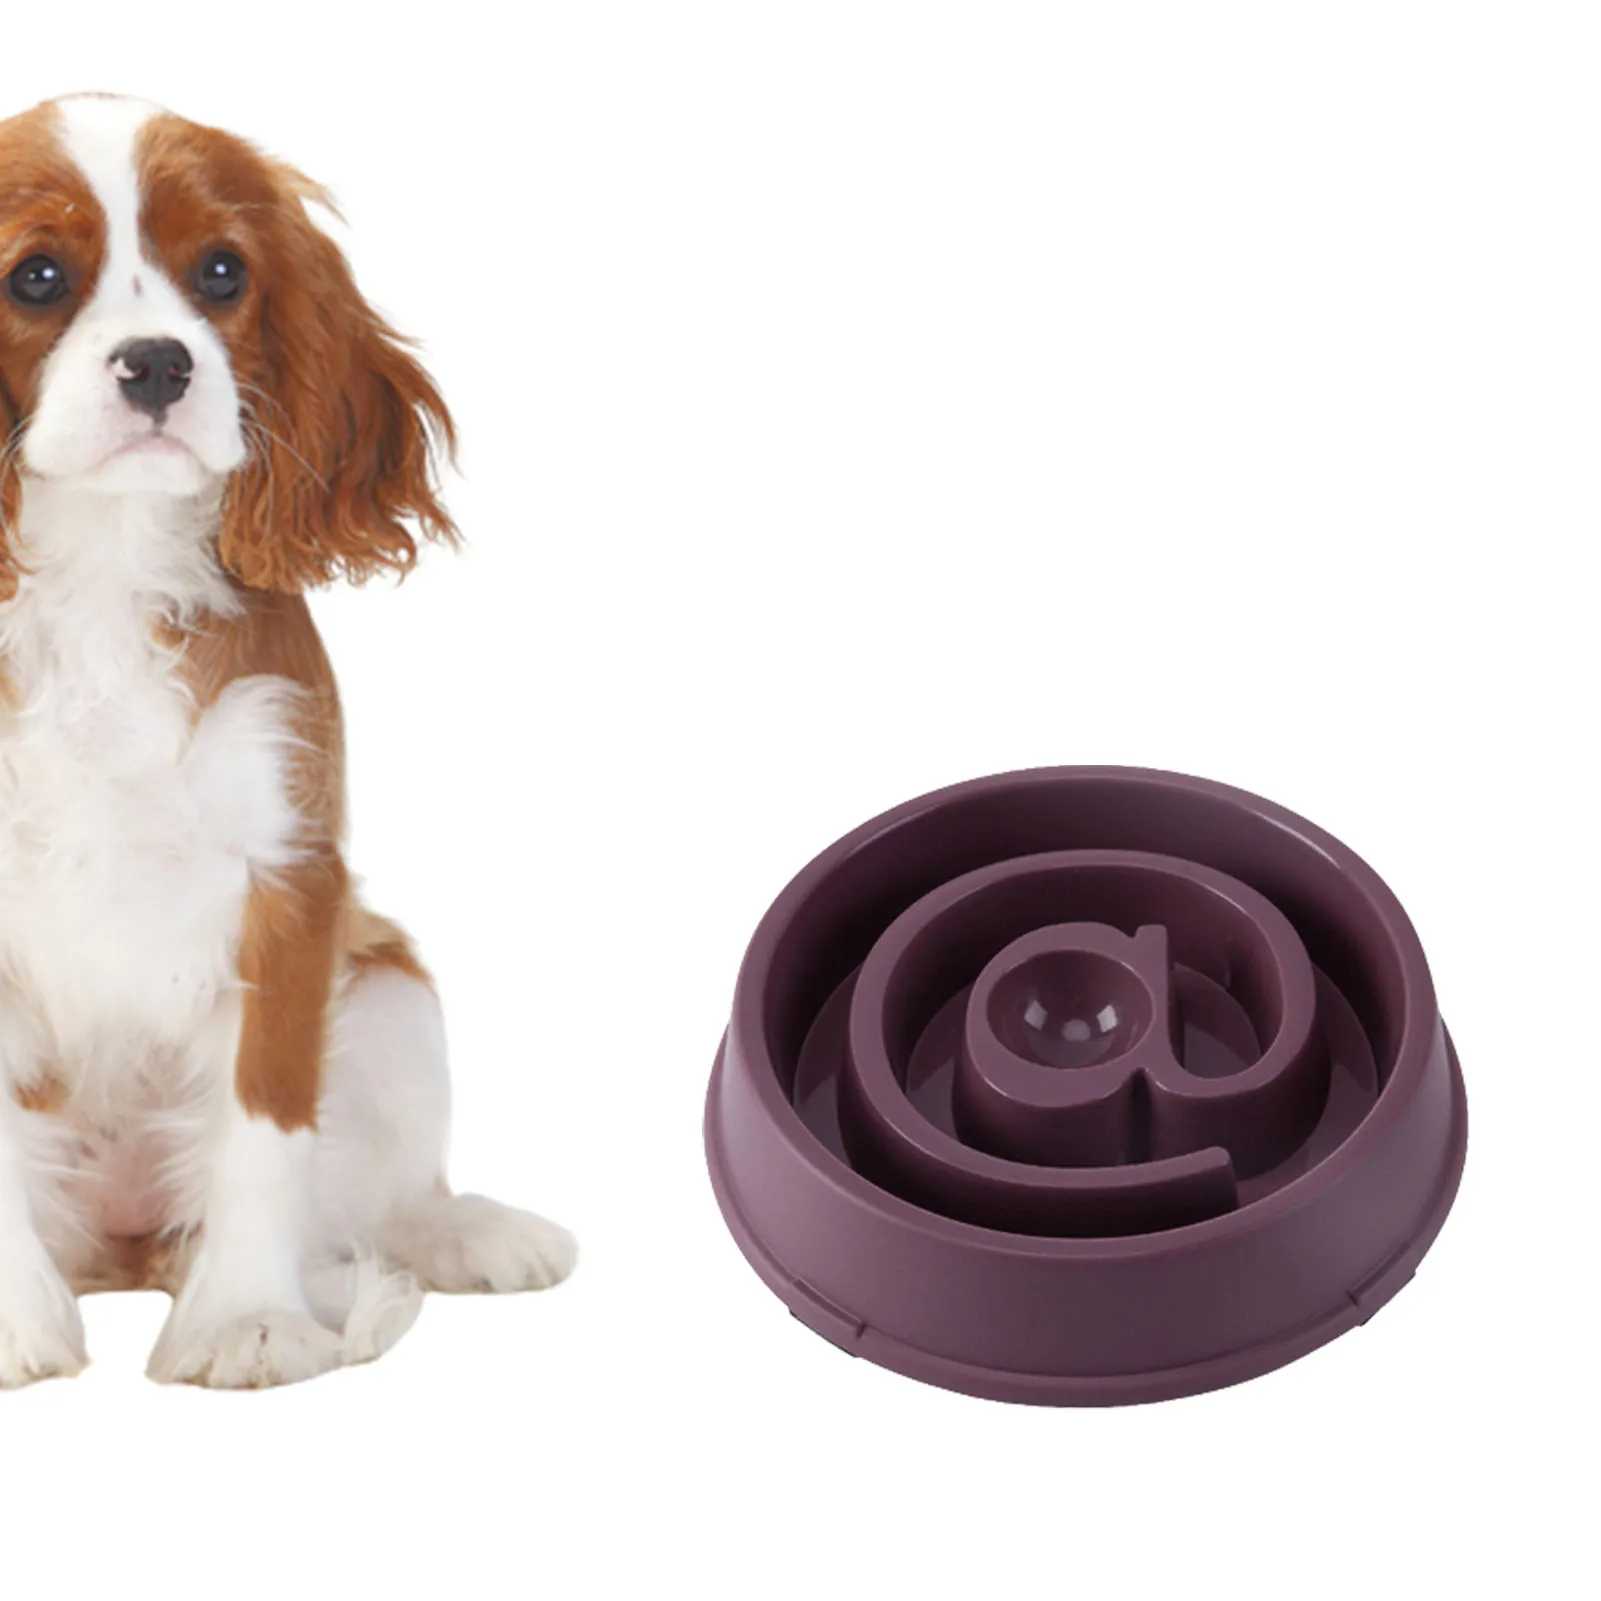 

Dog Bowl Slow Feeder Fast Eater Slow Feed Dog Bowls Puzzle Feeders For Dogs To Slow Down Eating Slowing Down Eating Dishes Bowls